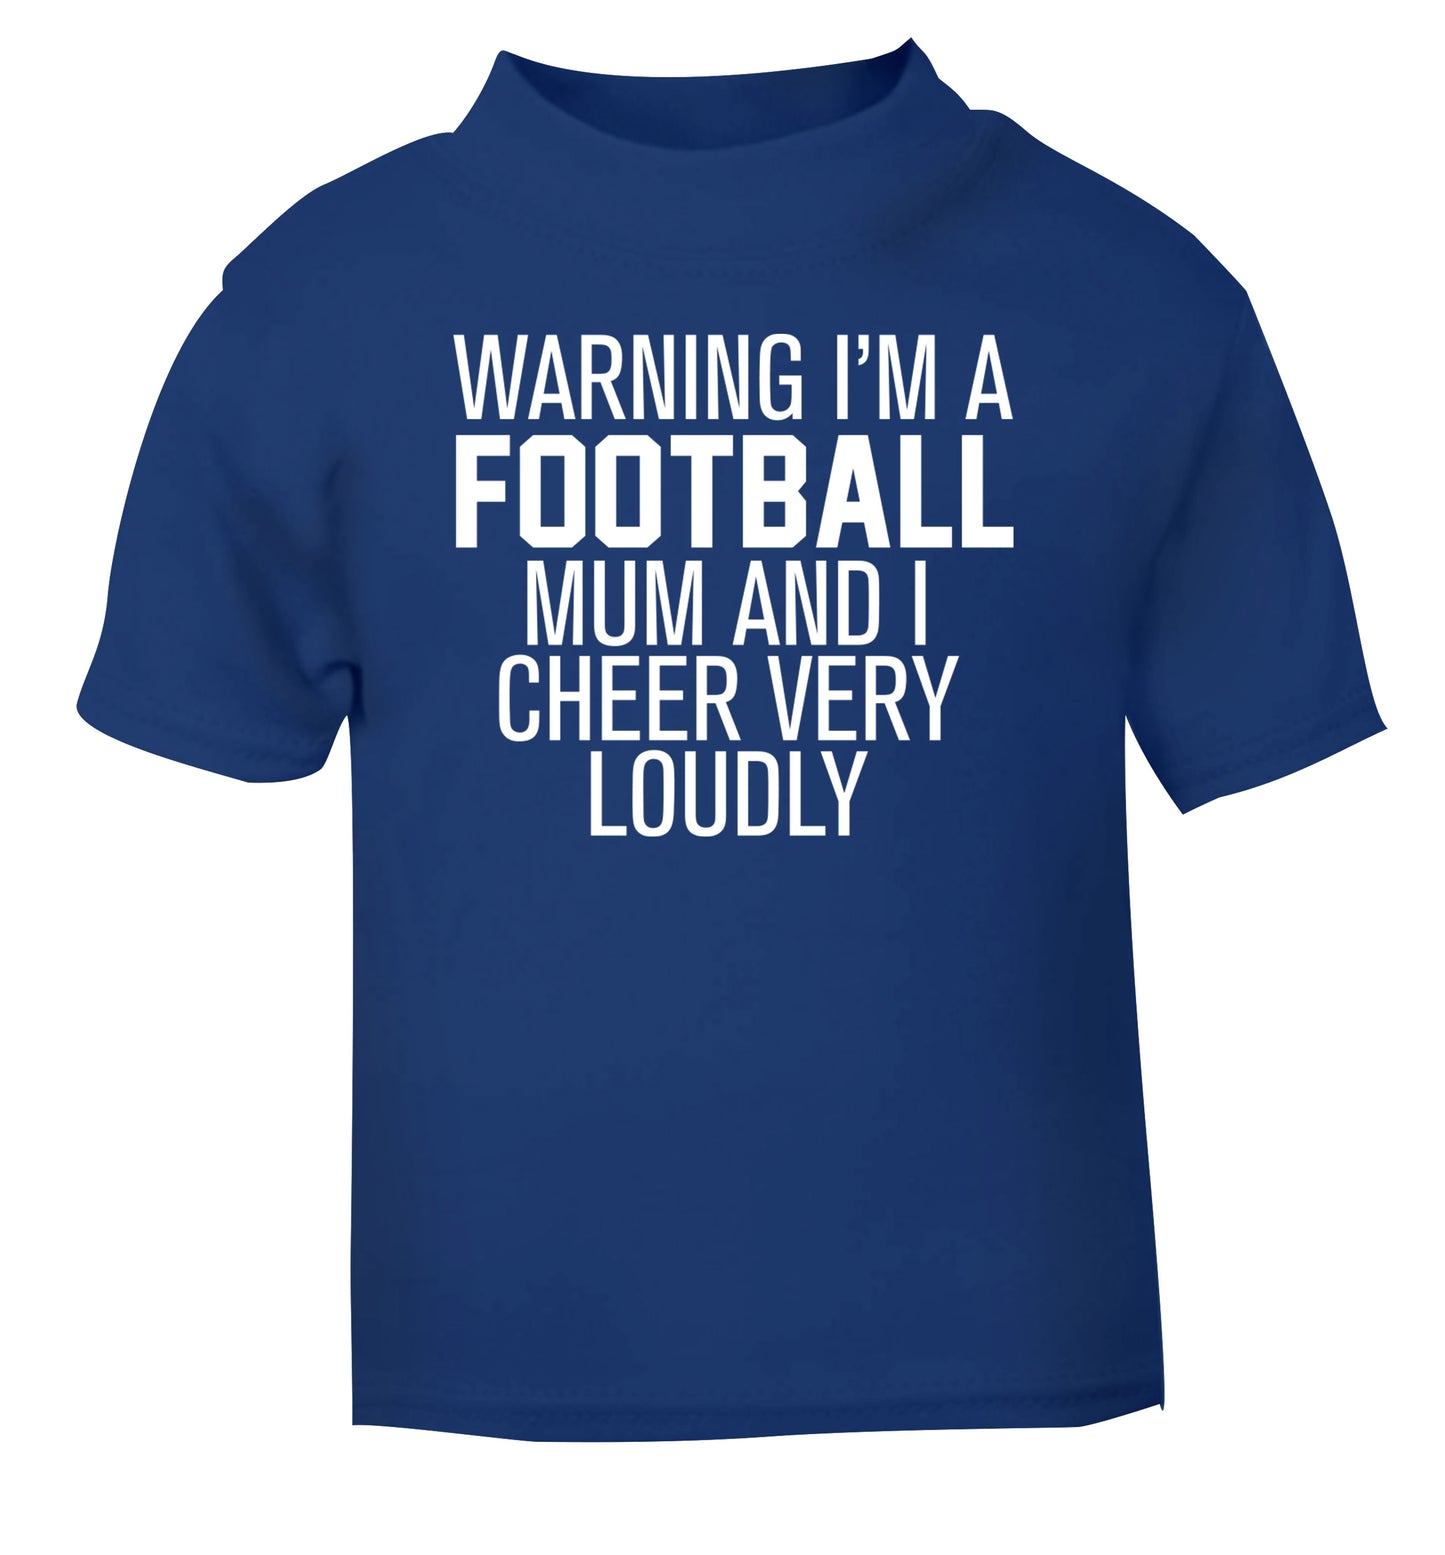 Warning I'm a football mum and I cheer very loudly blue Baby Toddler Tshirt 2 Years